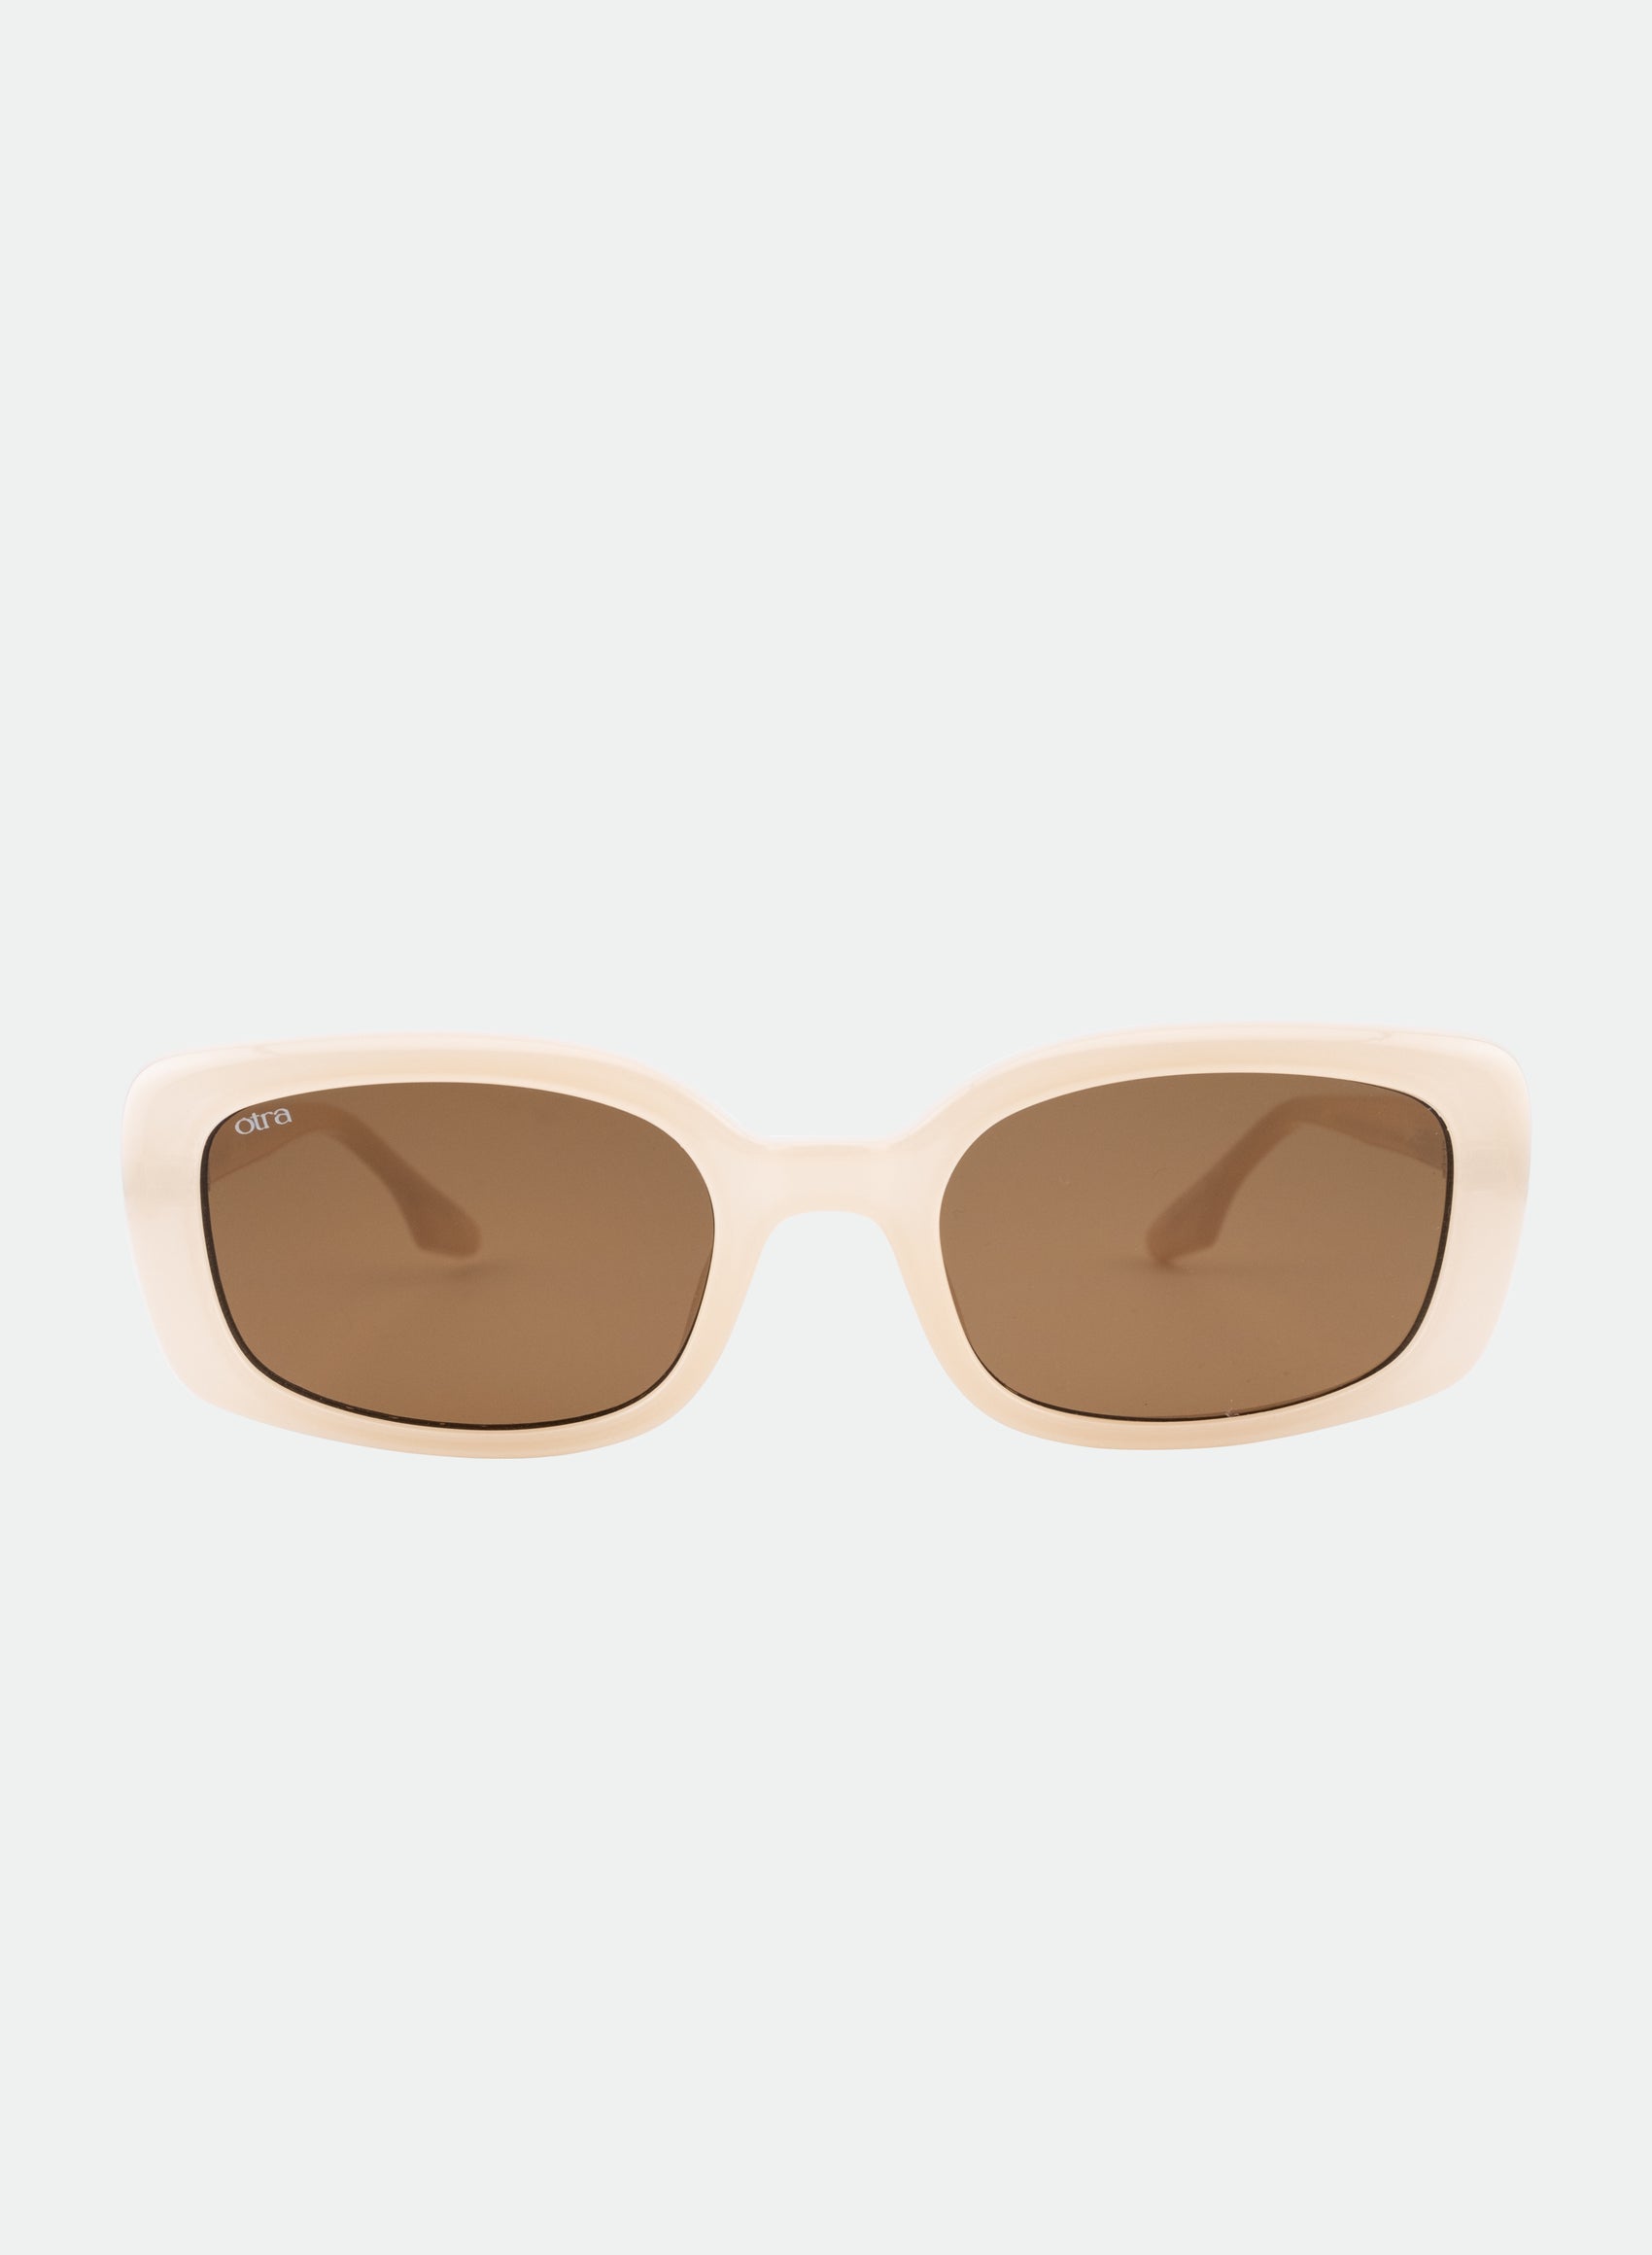 Daisy sunglasses in frosted ivory front view